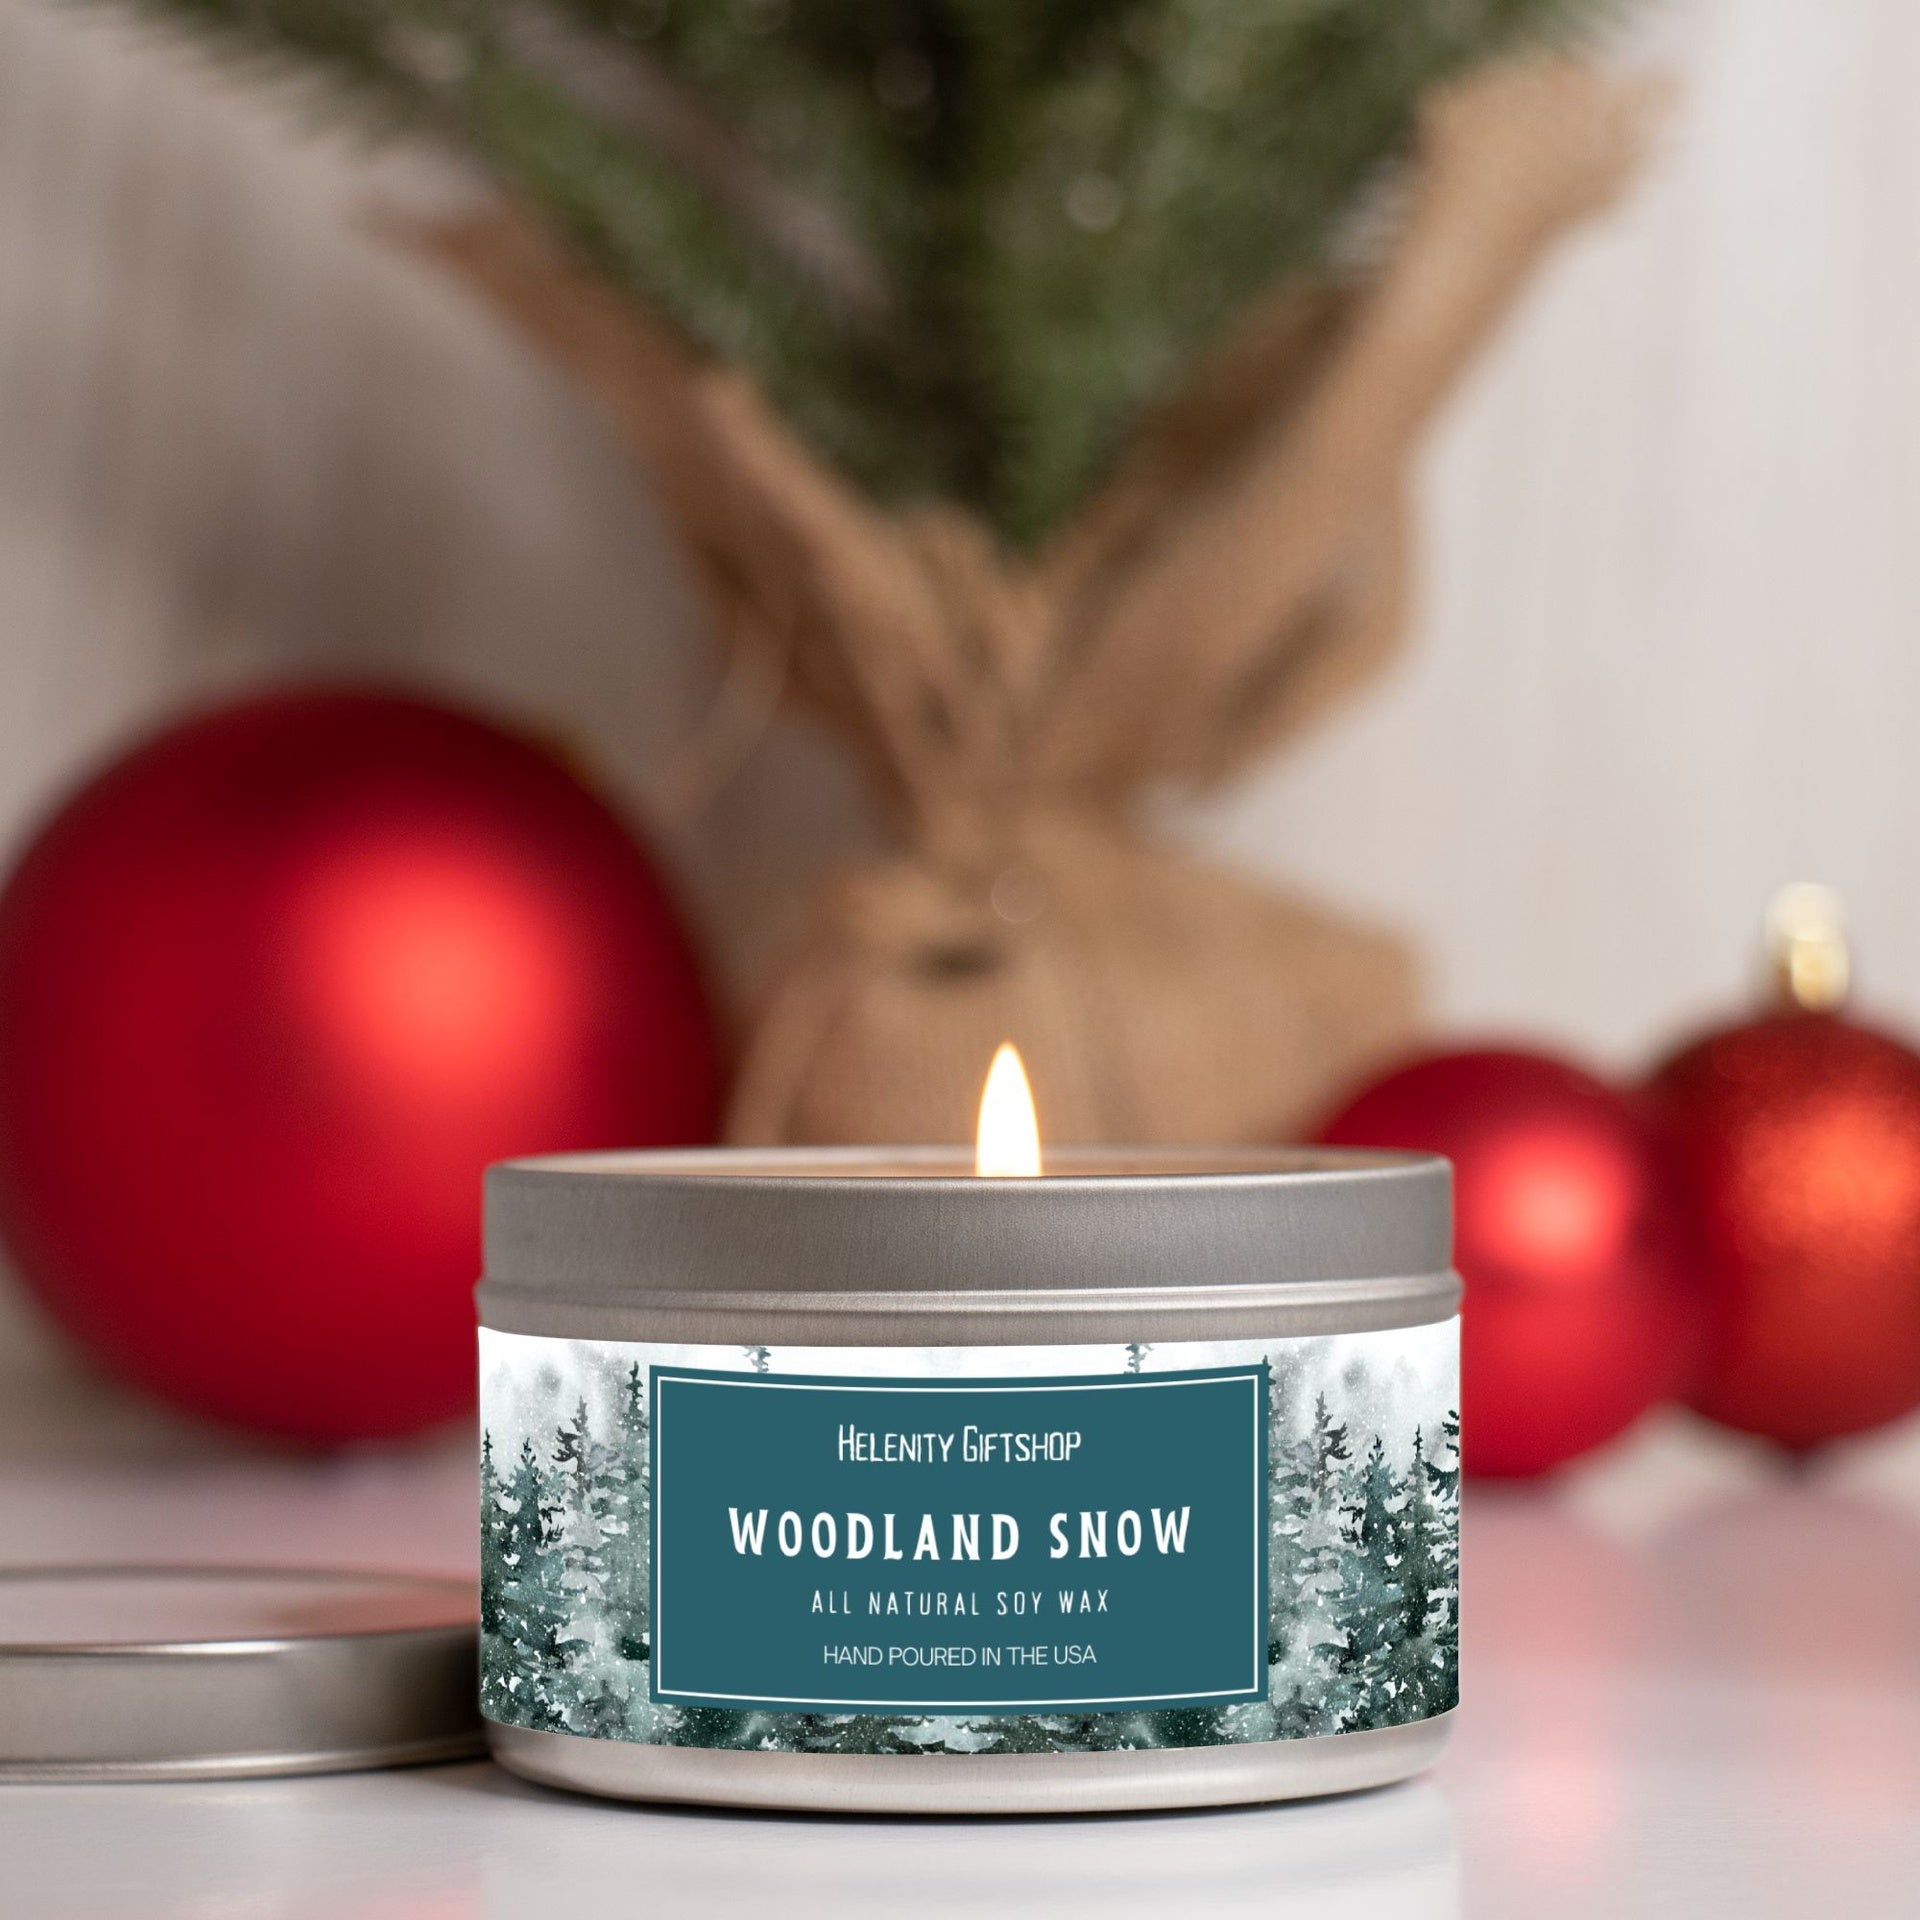 Woodland Snow Tin Candle 8oz Winter Collection Helenity Gift Shop